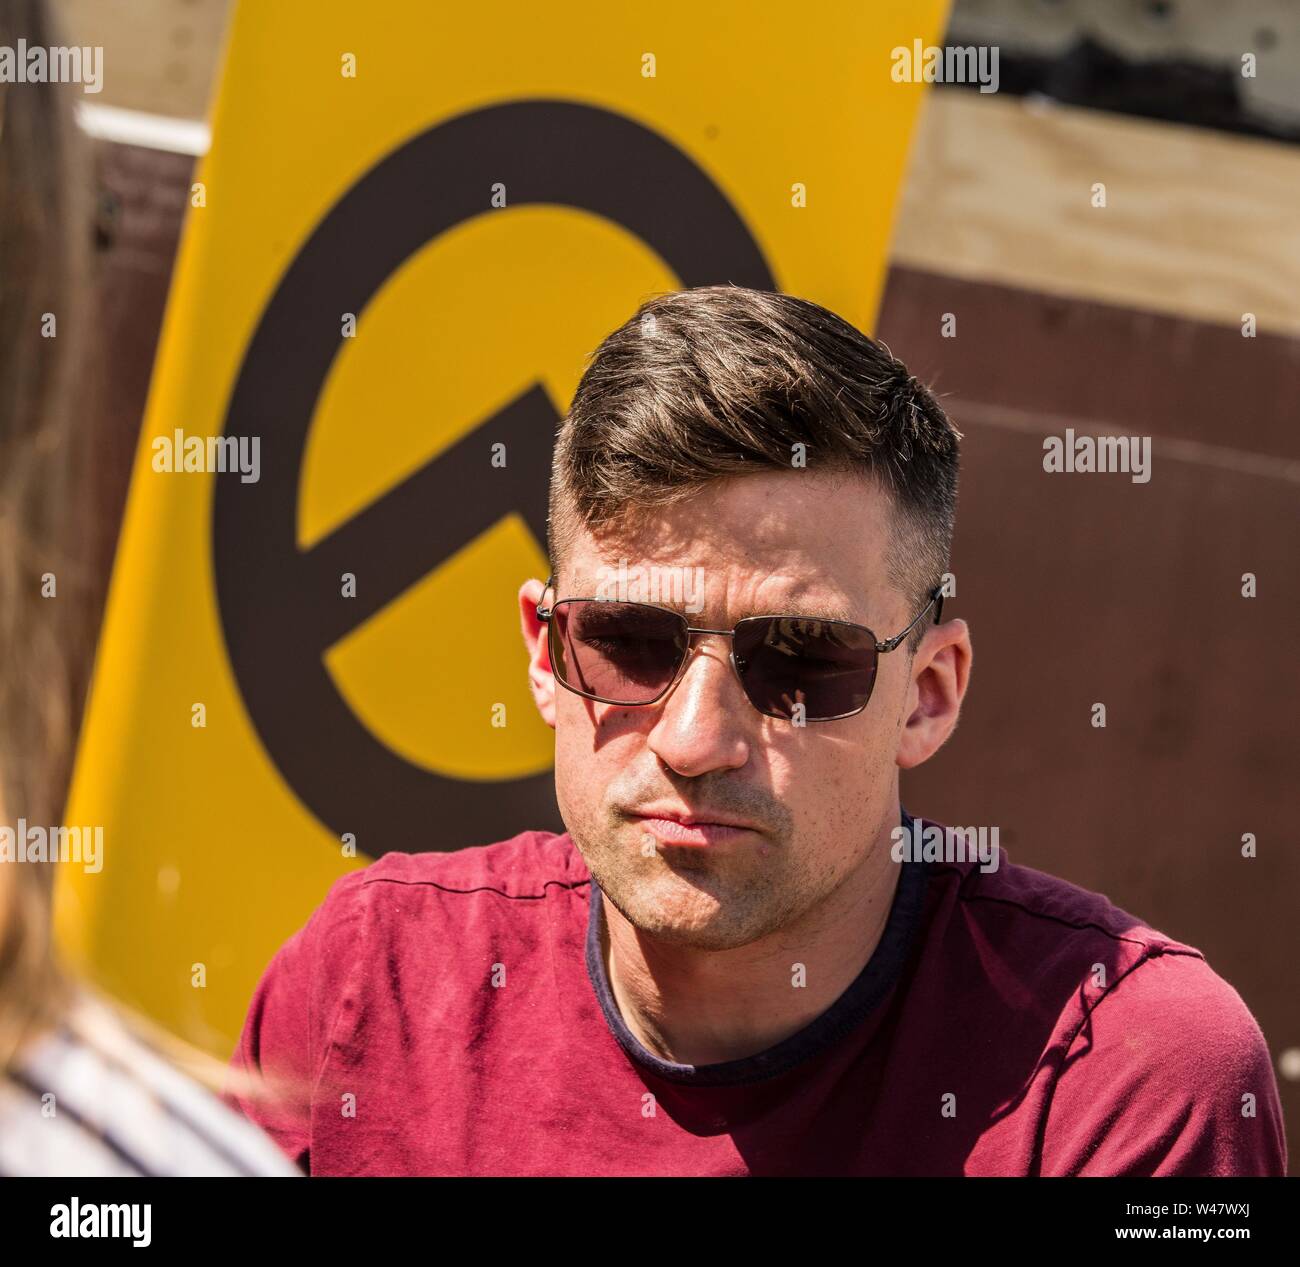 Halle Saale, Sachsen Anhalt, Germany. 20th July, 2019. MARTIN SELLNER, head of the Identitaere Bewegung (Identitaeren Movement). Sellner is a prominent figure of the alt right and international white supremacist movements. He is currently banned from traveling to the United States and has a permanent ban from entering the United Kingdom. Amid protests, the white supremacist, right extremist Identitaere Bewegung (Generation Identity, Identitaren Movement) held a rally in Halle (Saale). The Identitaere have recently faced numerous challenges, including raids to explore the connection of its h Stock Photo